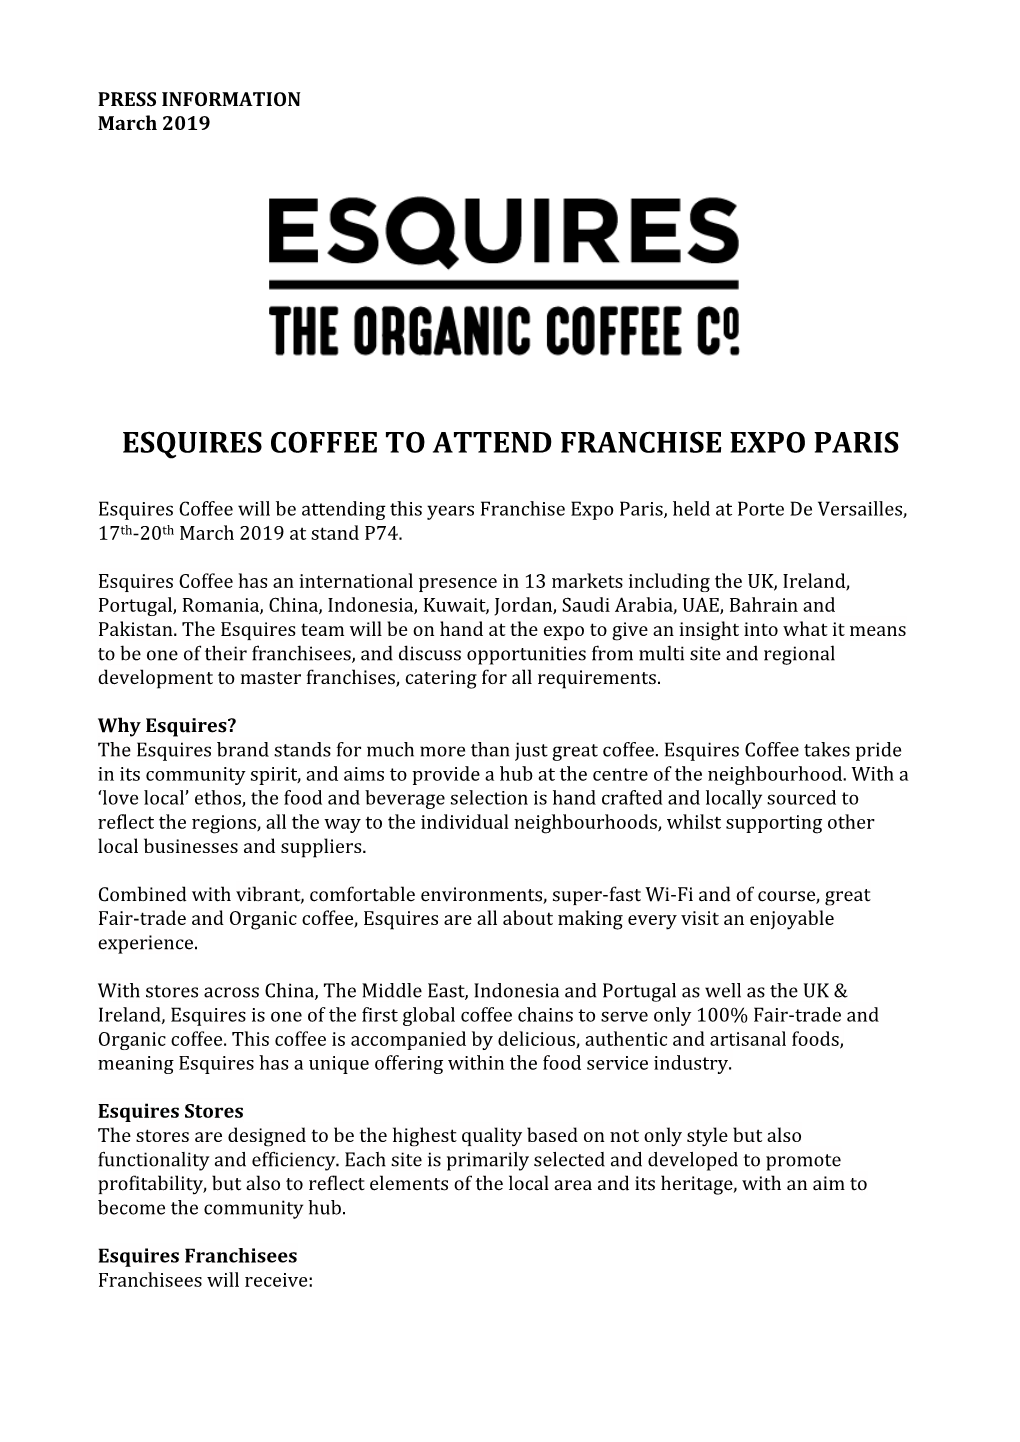 Esquires Coffee to Attend Franchise Expo Paris